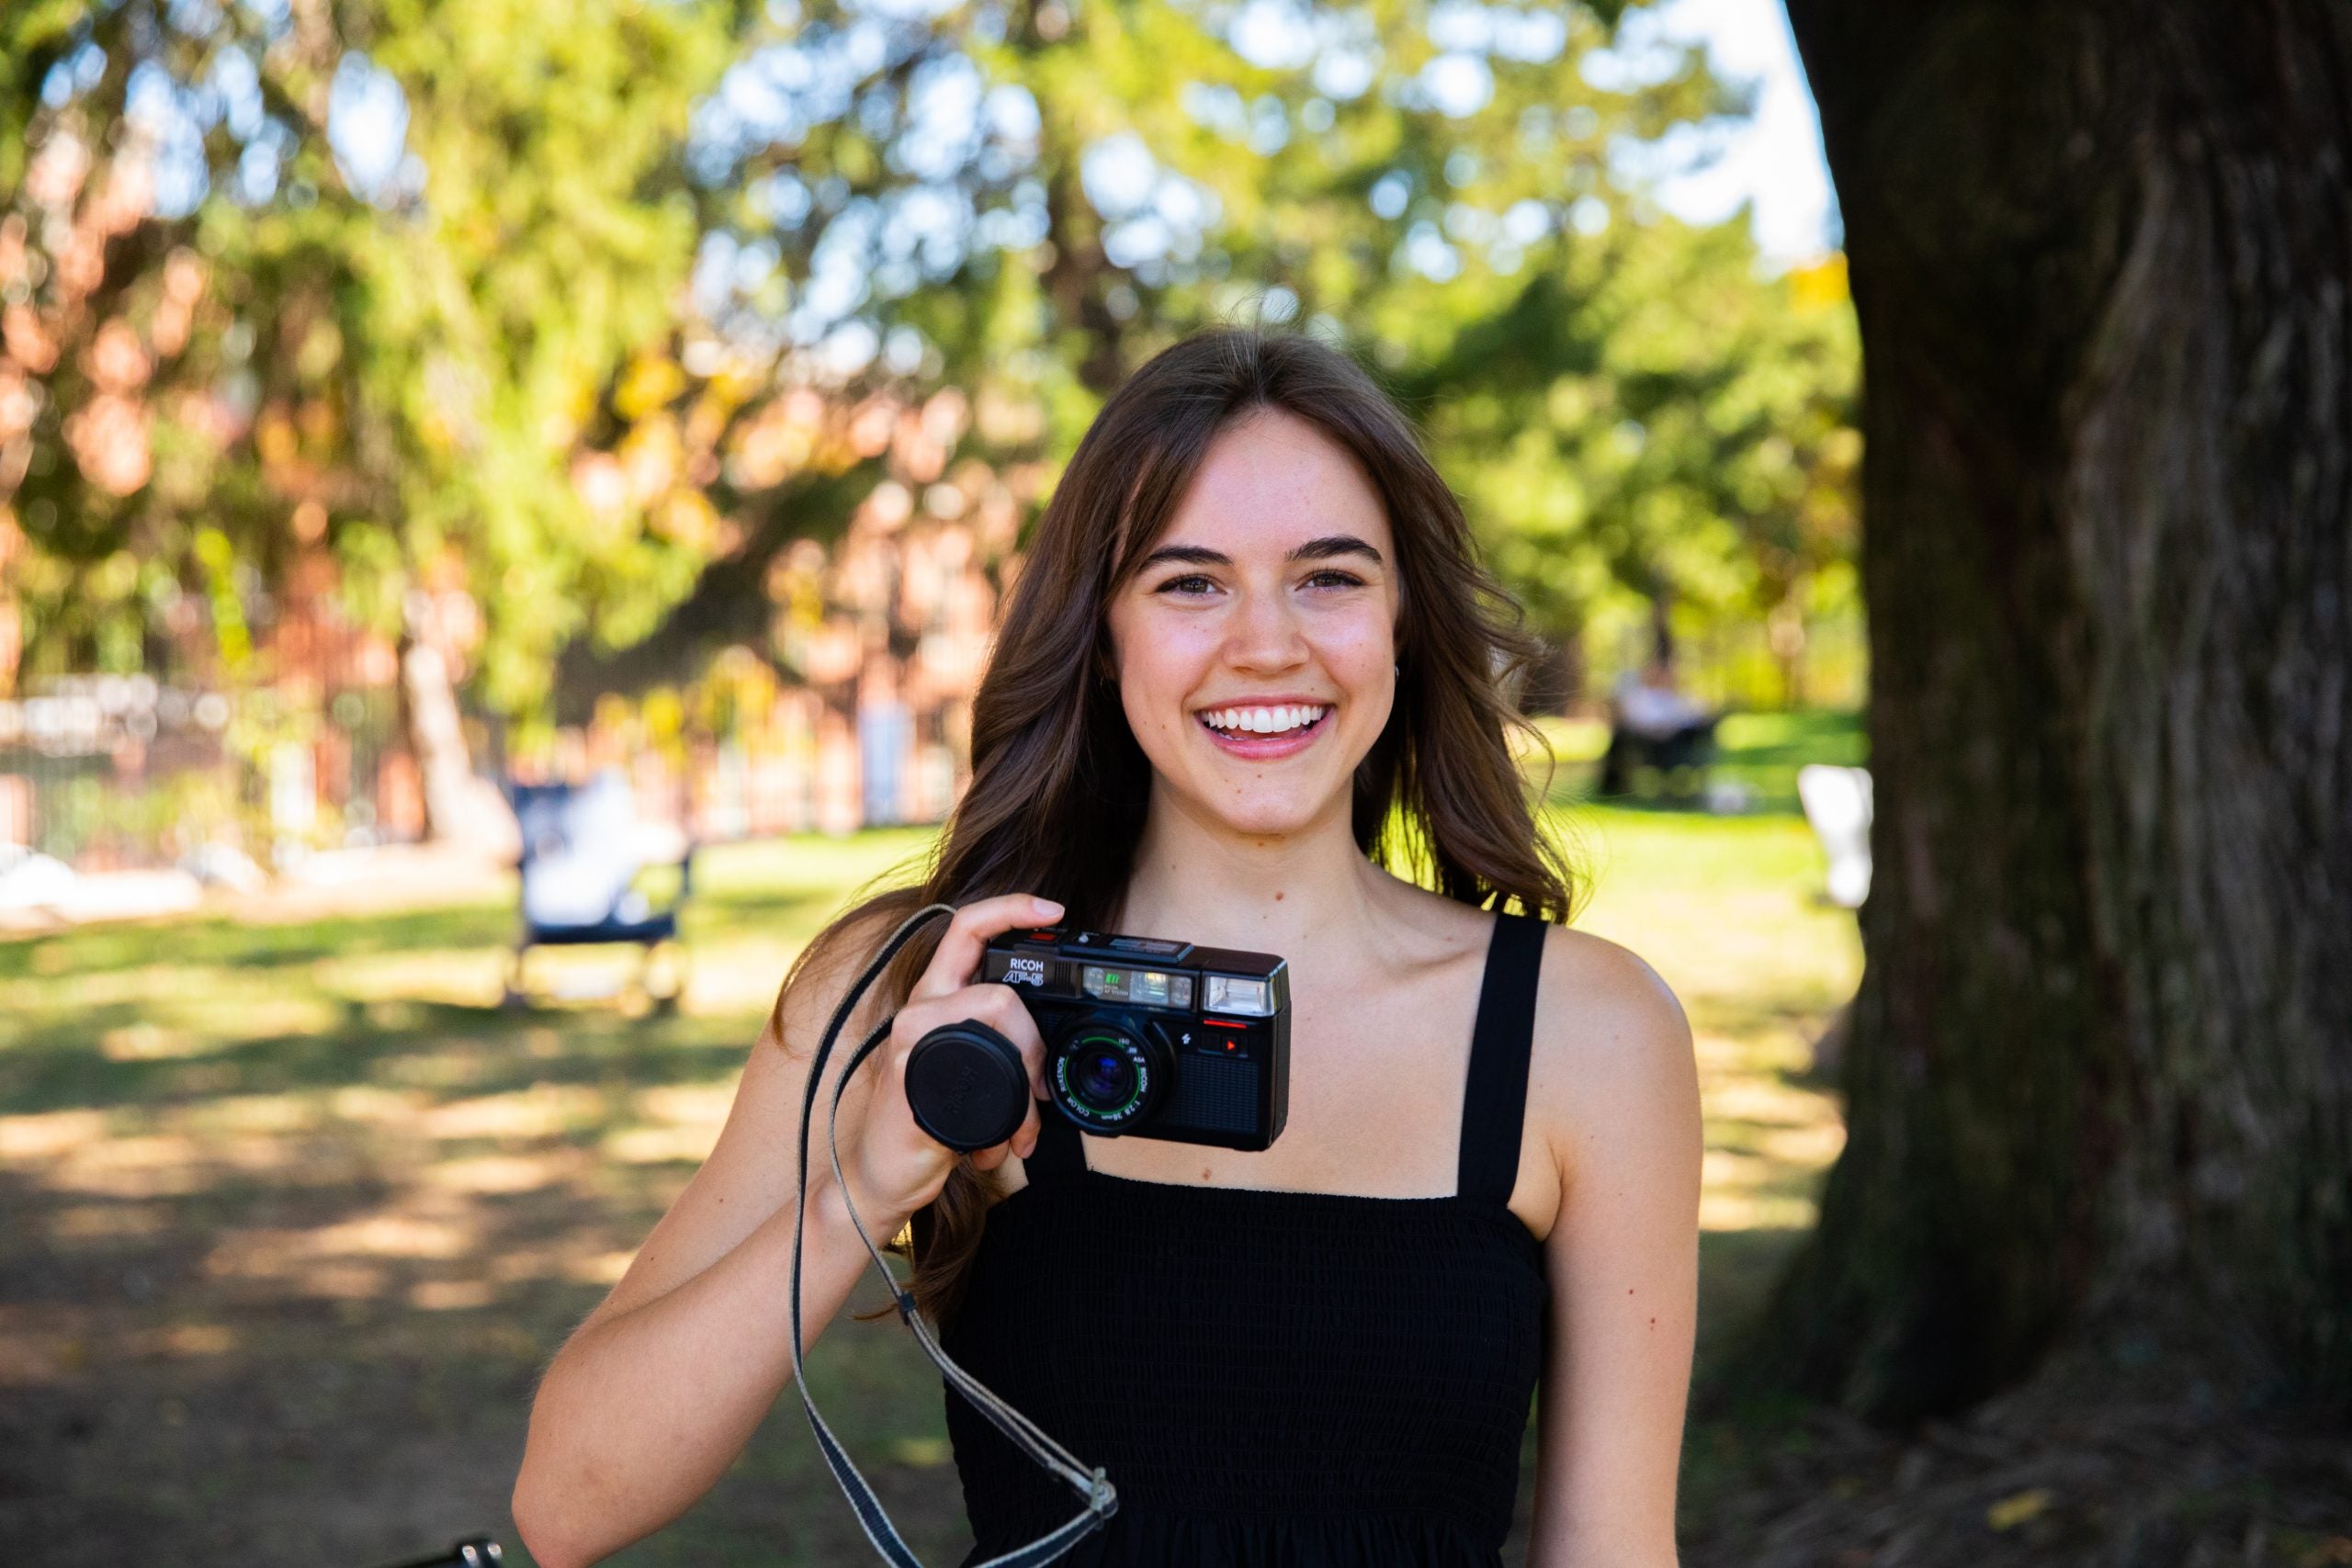 Emma Rose holds a camera outside in front of a tree